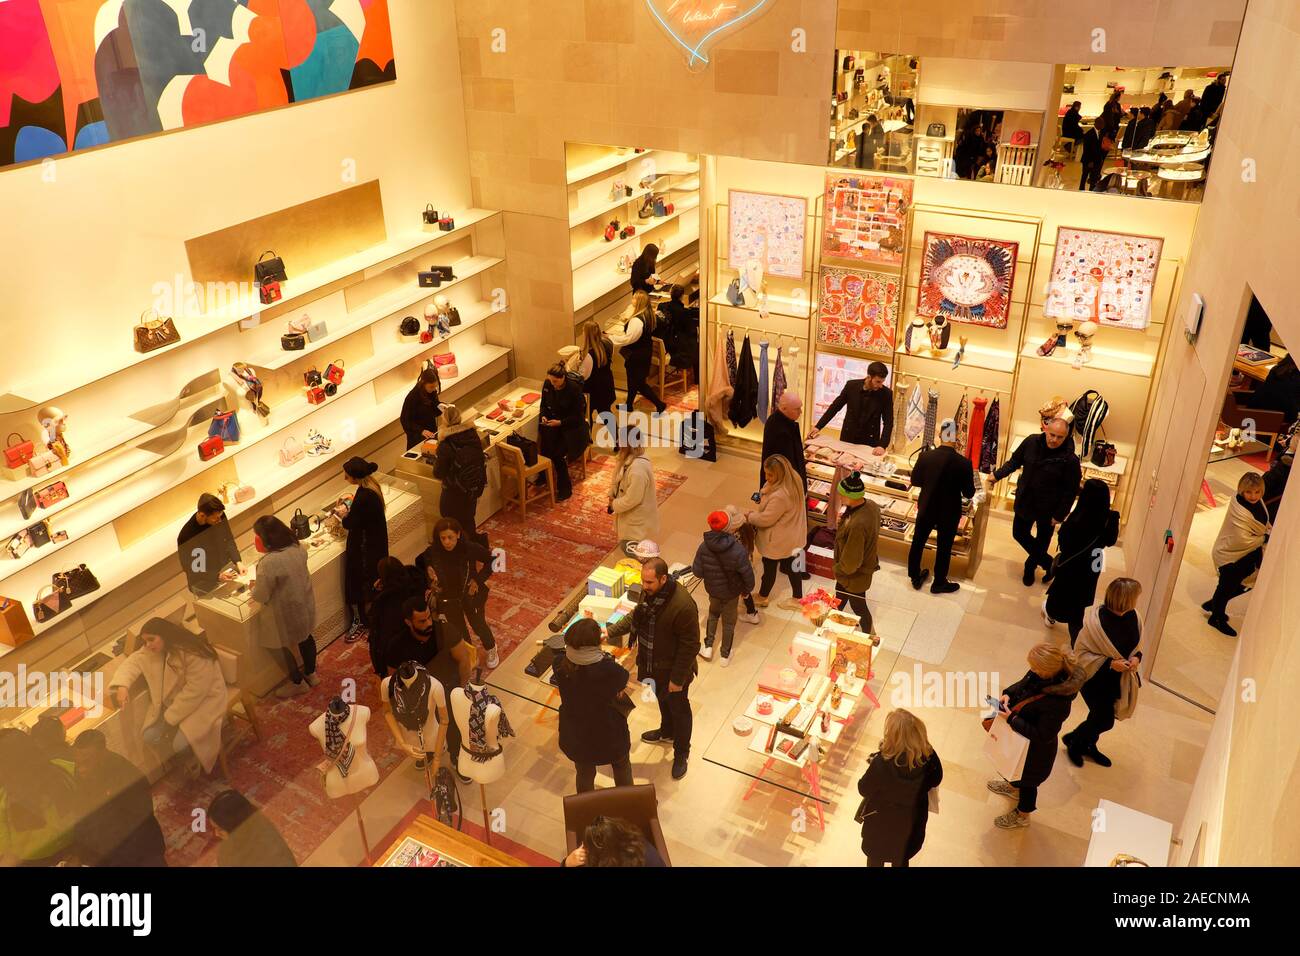 Louis Vuitton luxury store interior and people shopping shoppers inside on  New Bond Street in London England UK Great Britain KATHY DEWITT Stock Photo  - Alamy